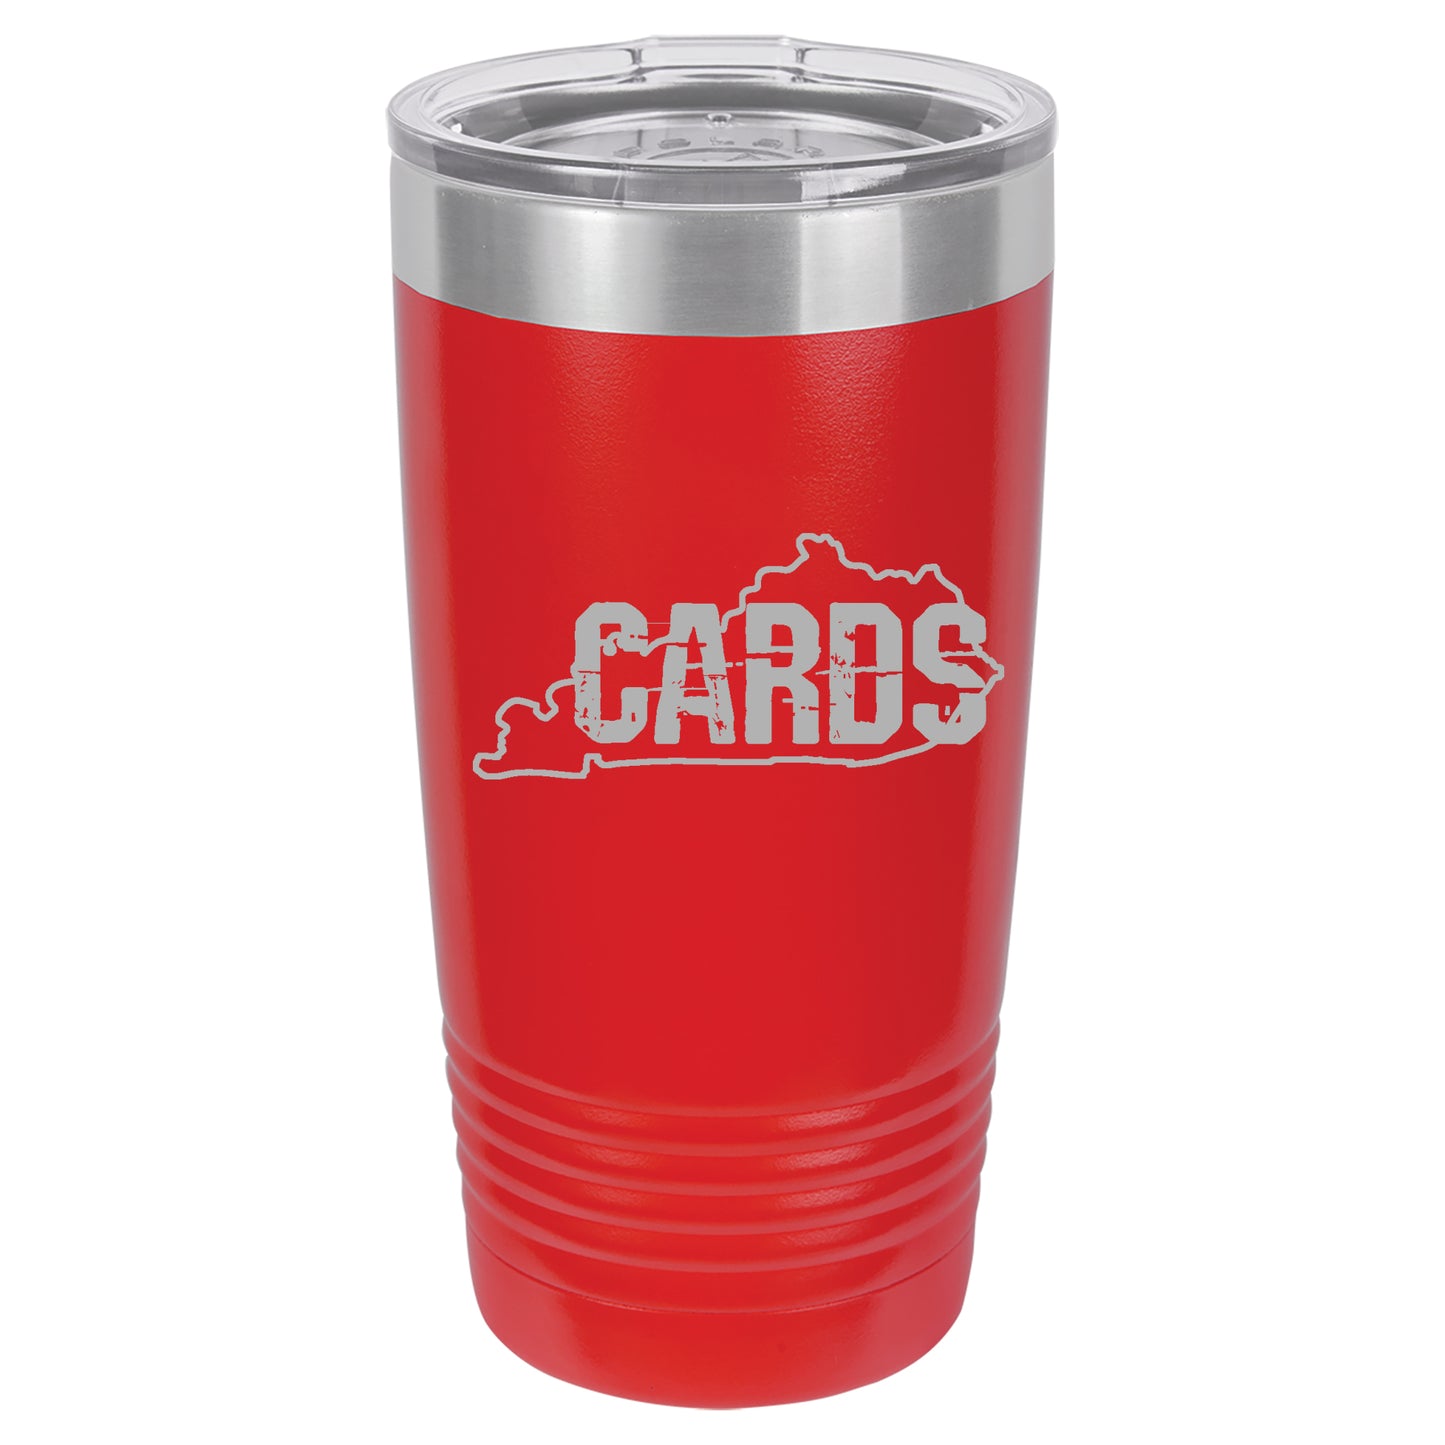 Stainless Steel/Powder Coated Tumbler